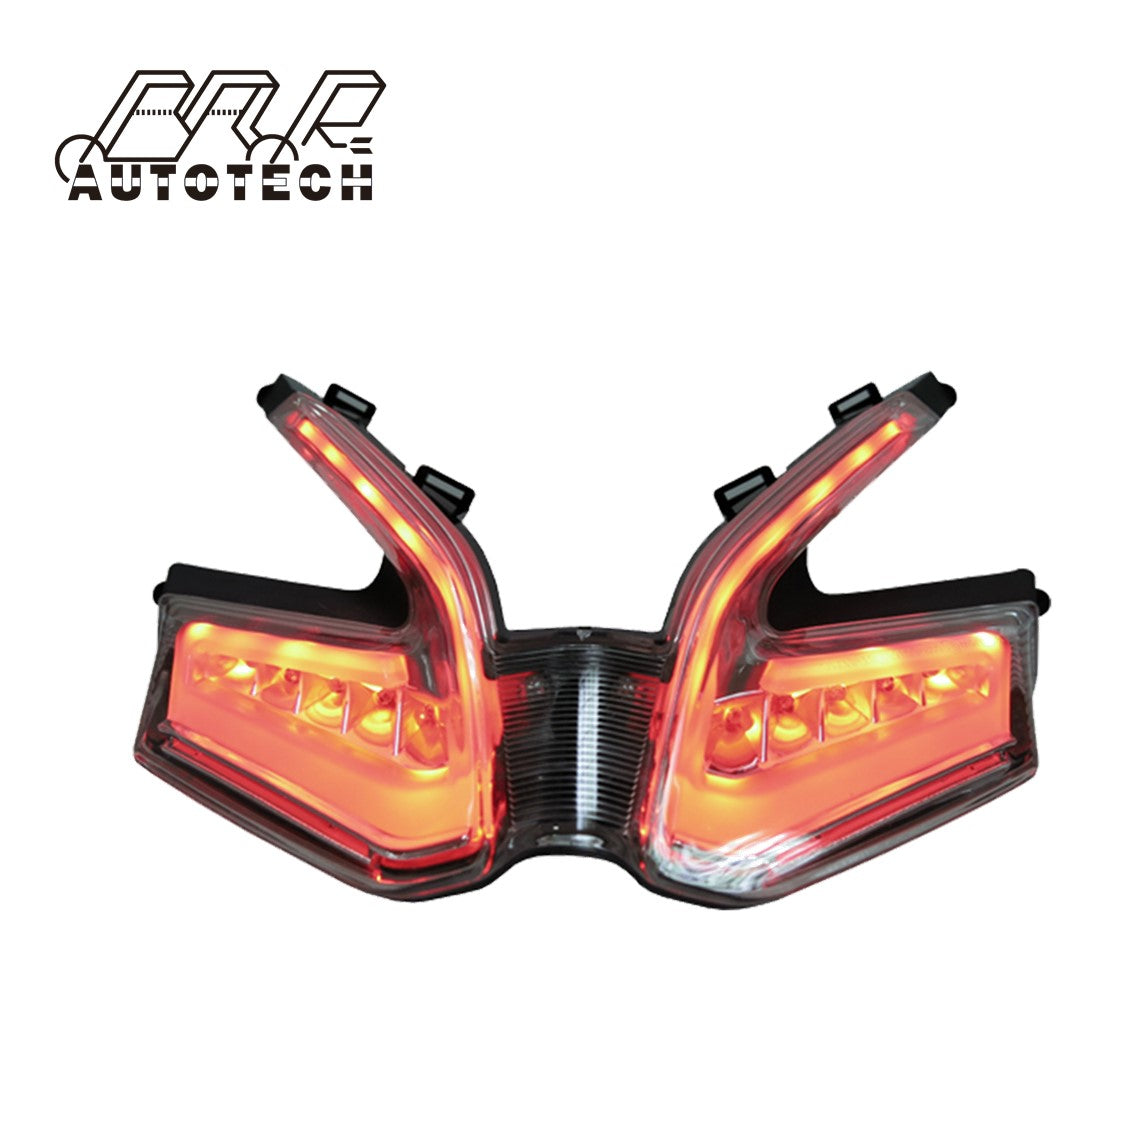 Motorcycle led rear light For DUCATI 959 Panigale 1199 1299 11-13 14-17